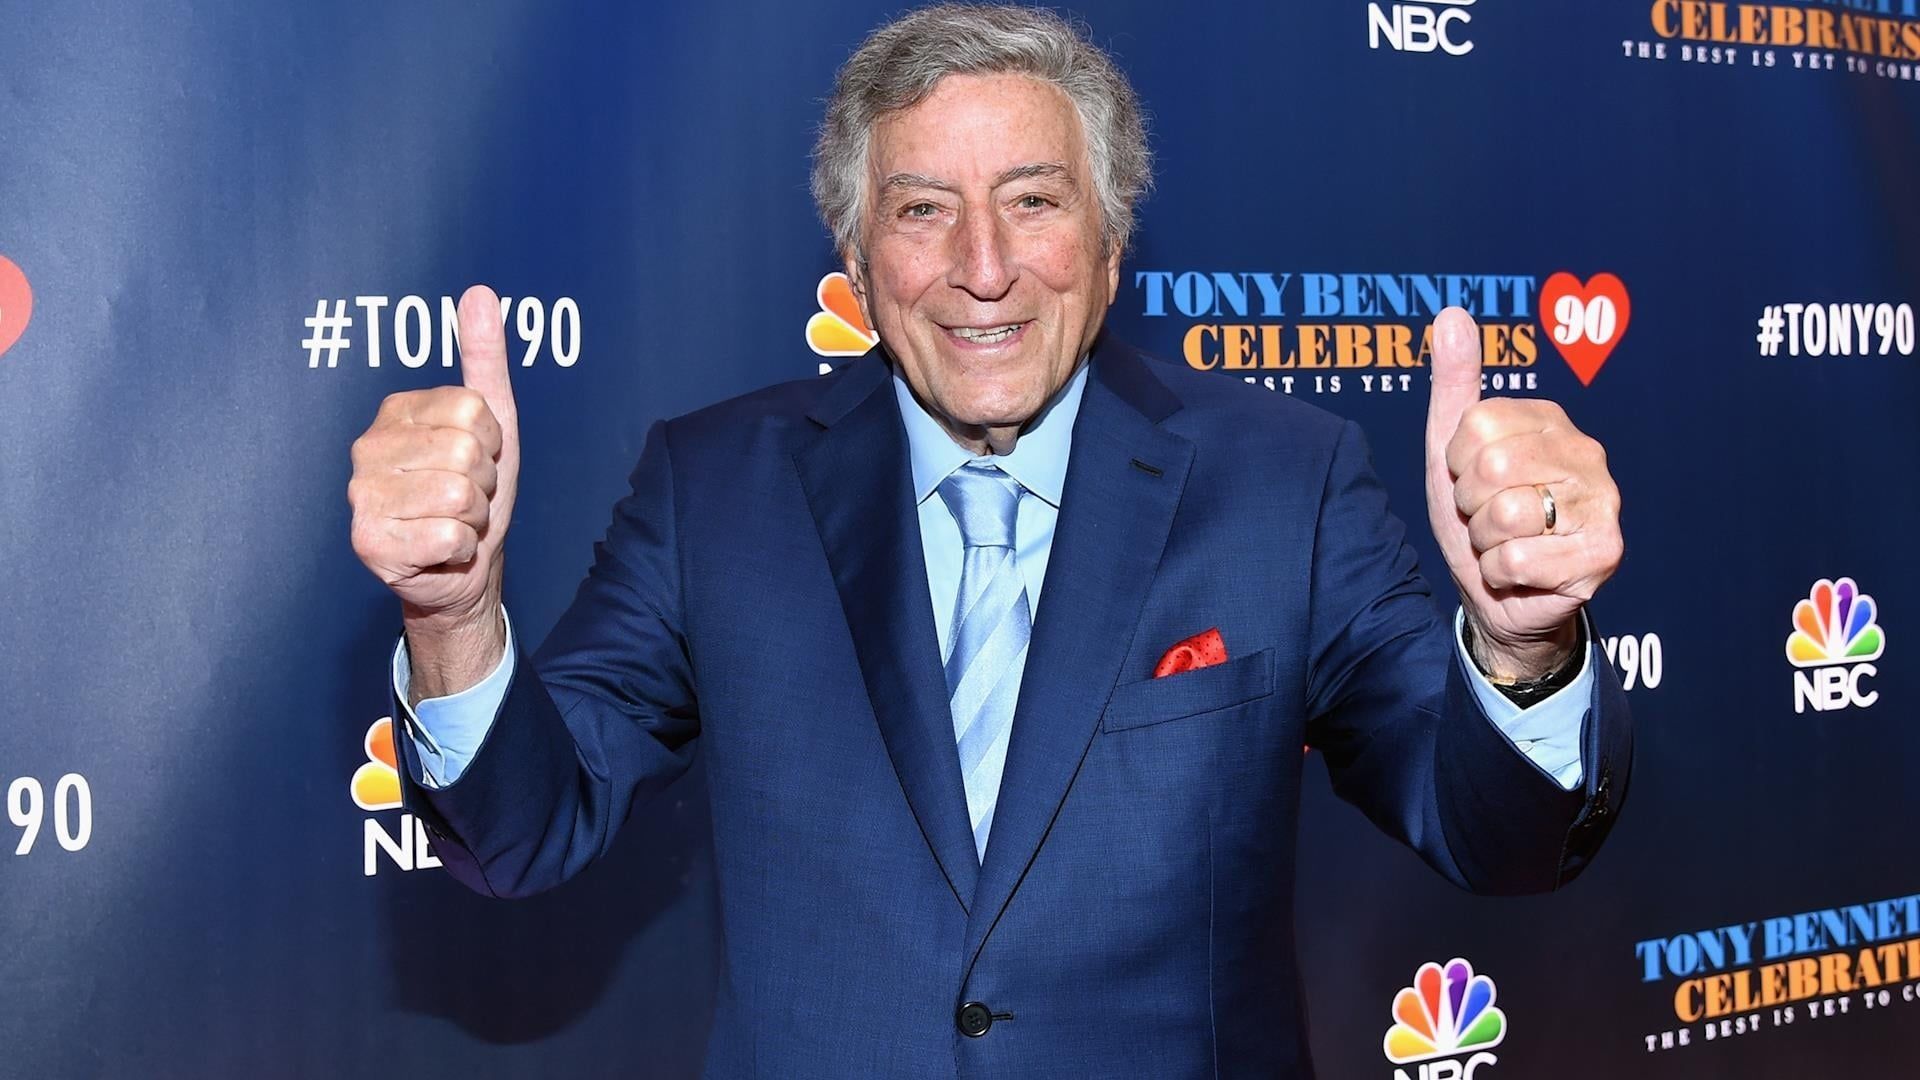 Tony Bennett Celebrates 90: The Best Is Yet to Come background